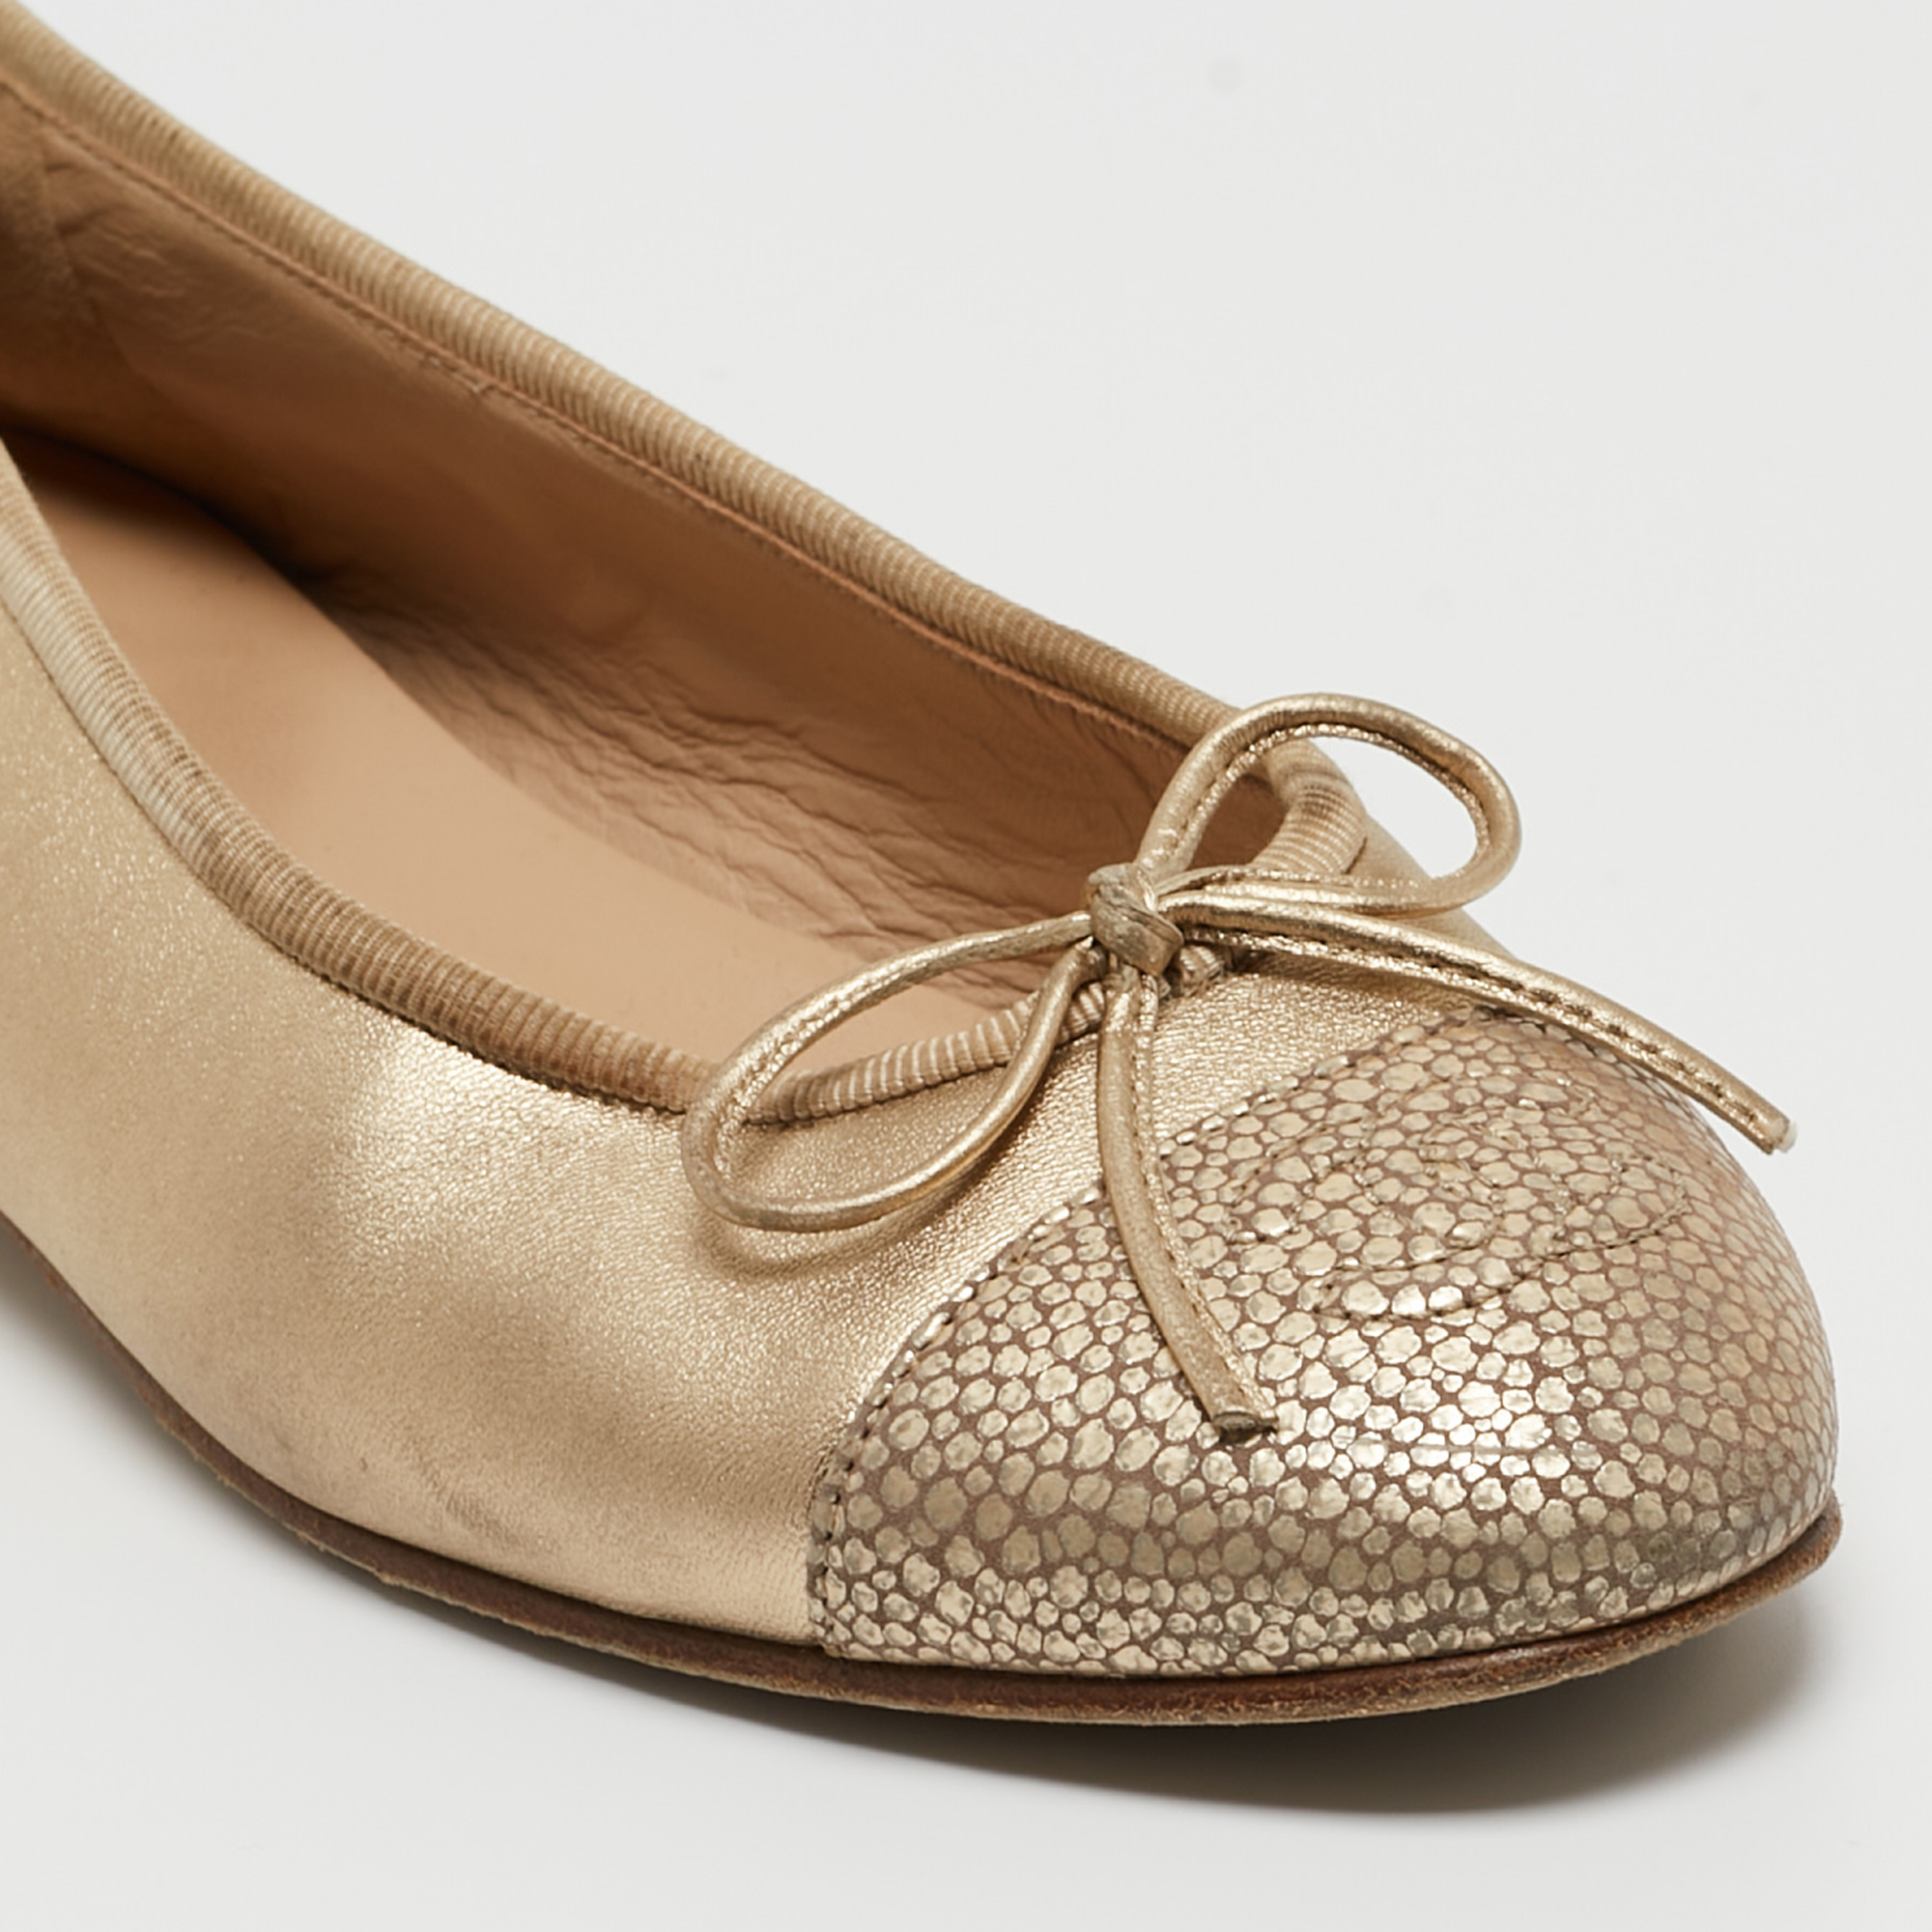 Chanel Gold Leather CC Cap Toe Bow Ballet Flats Size 34.5